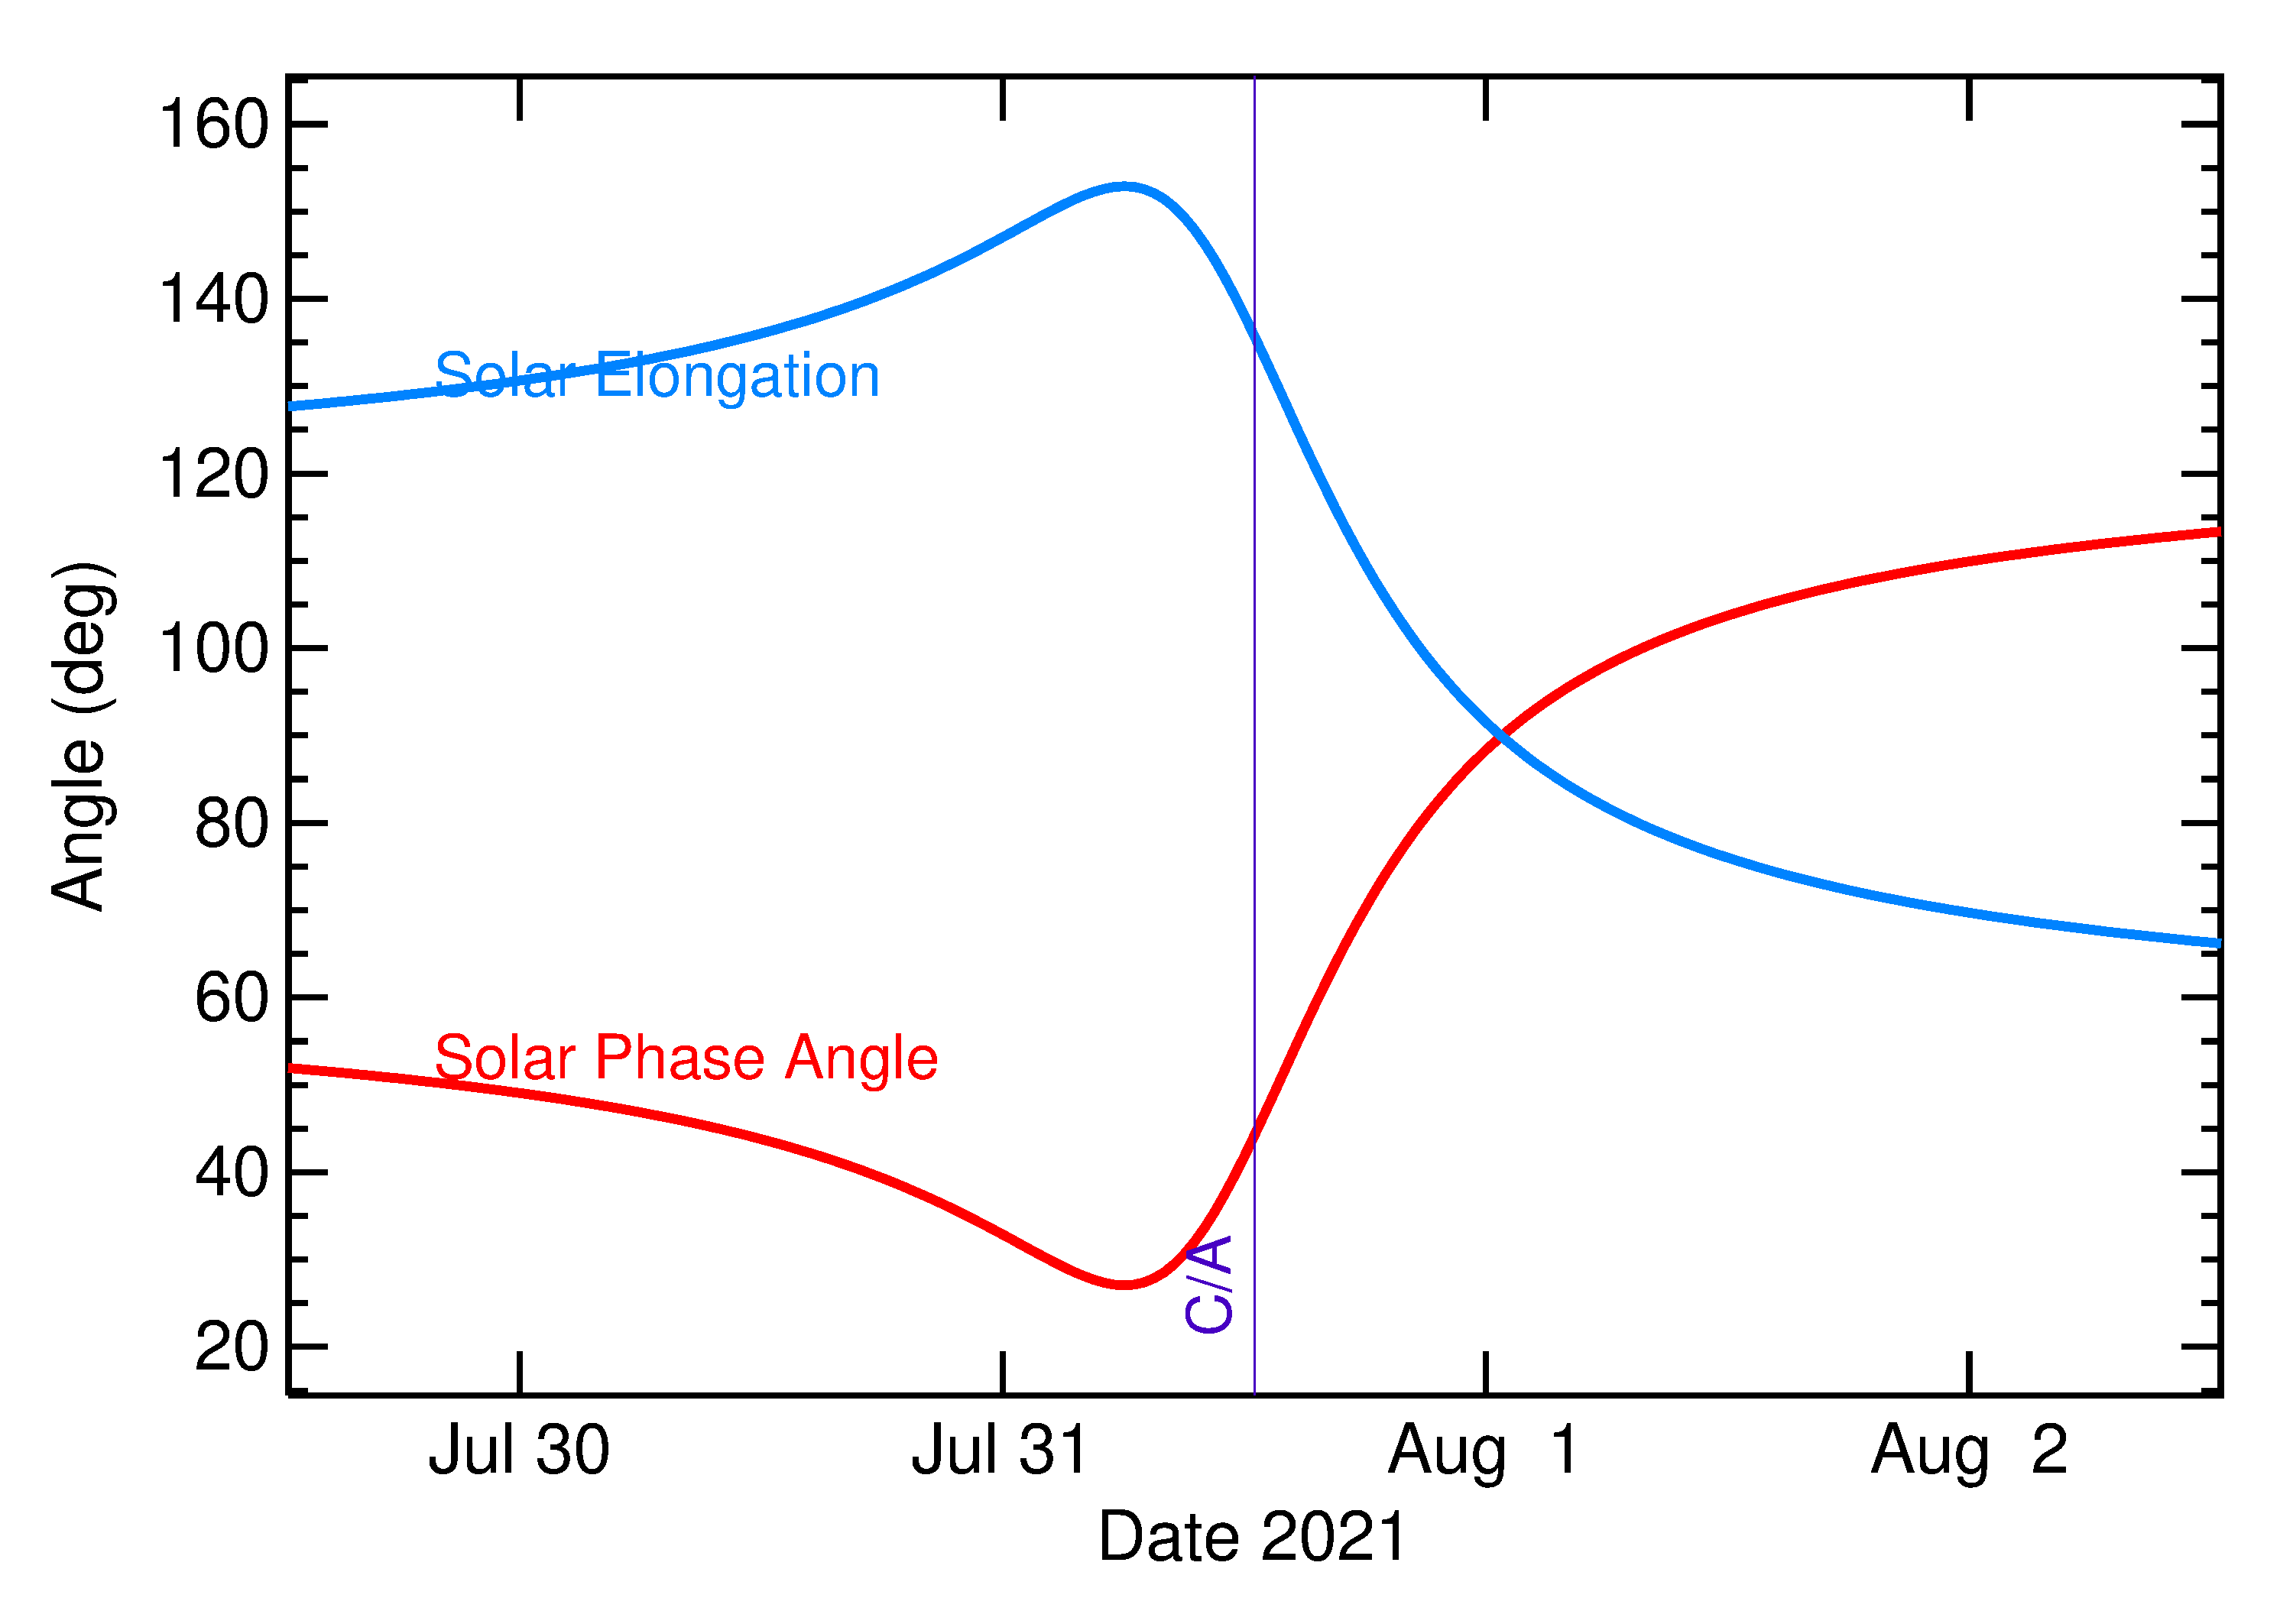 Solar Elongation and Solar Phase Angle of 2021 OD1 in the days around closest approach